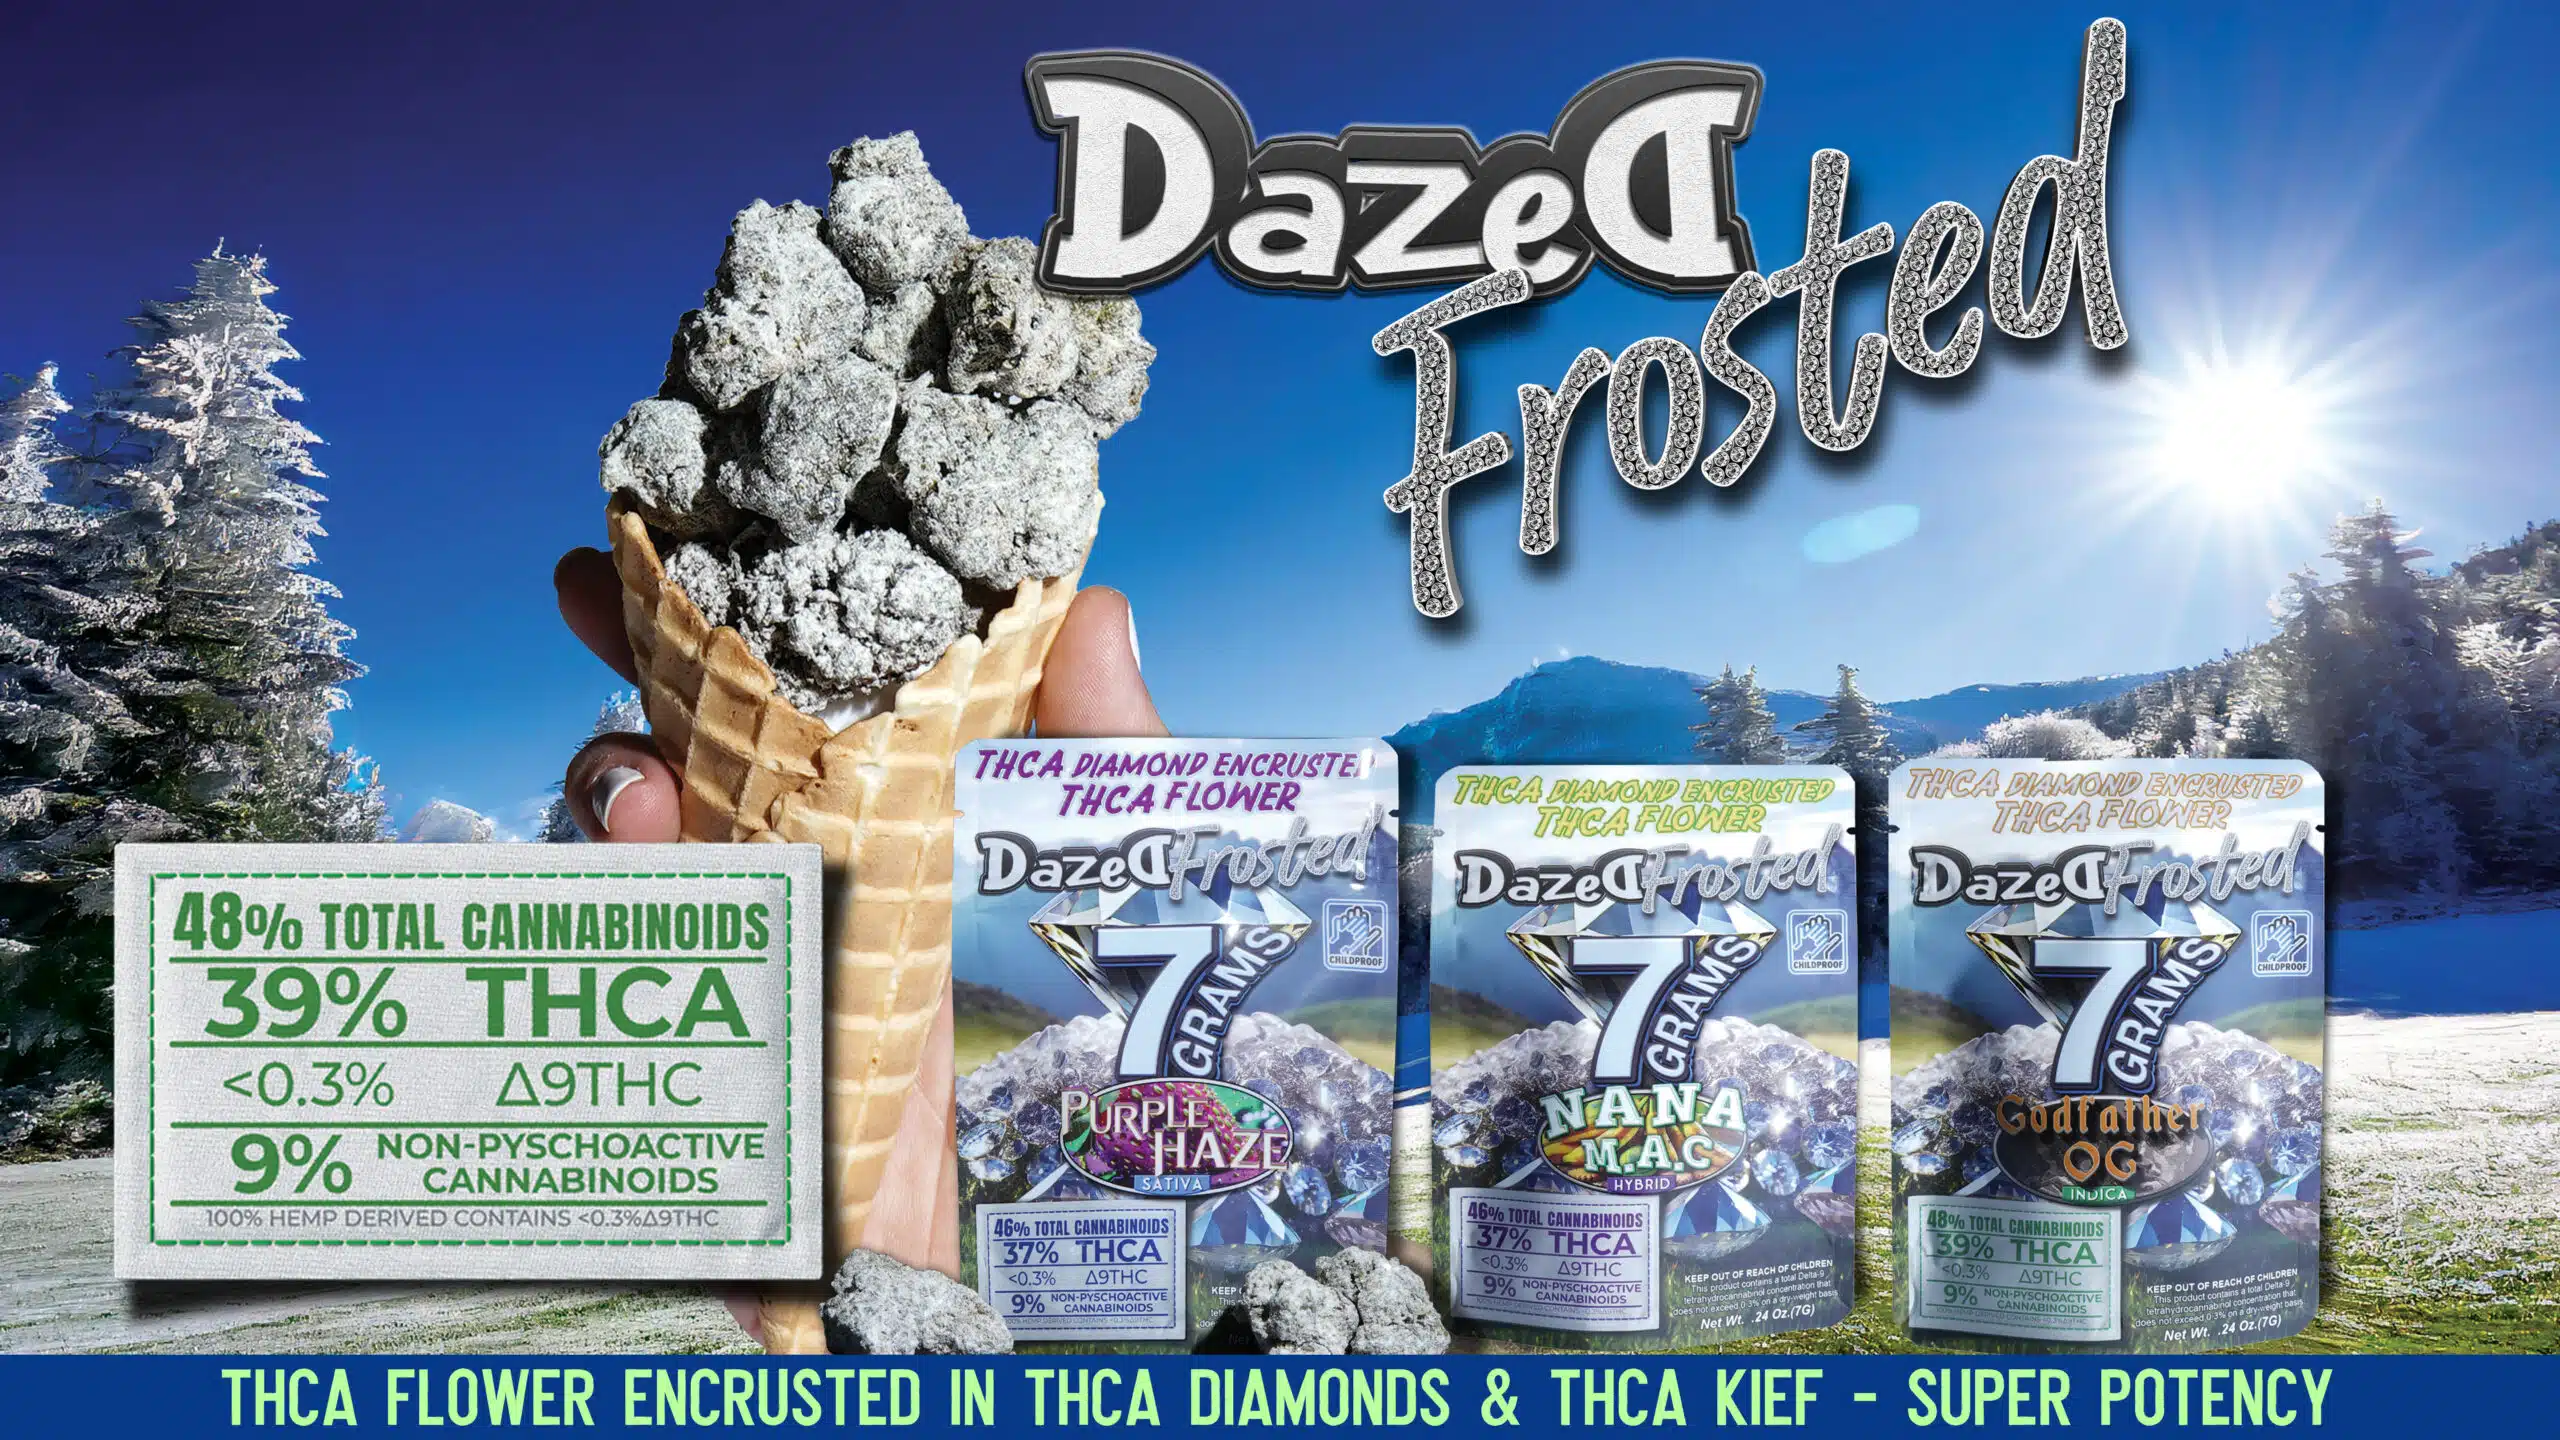 Dazed frosted - dazed frosted - dazed frosted - dazed frosted.